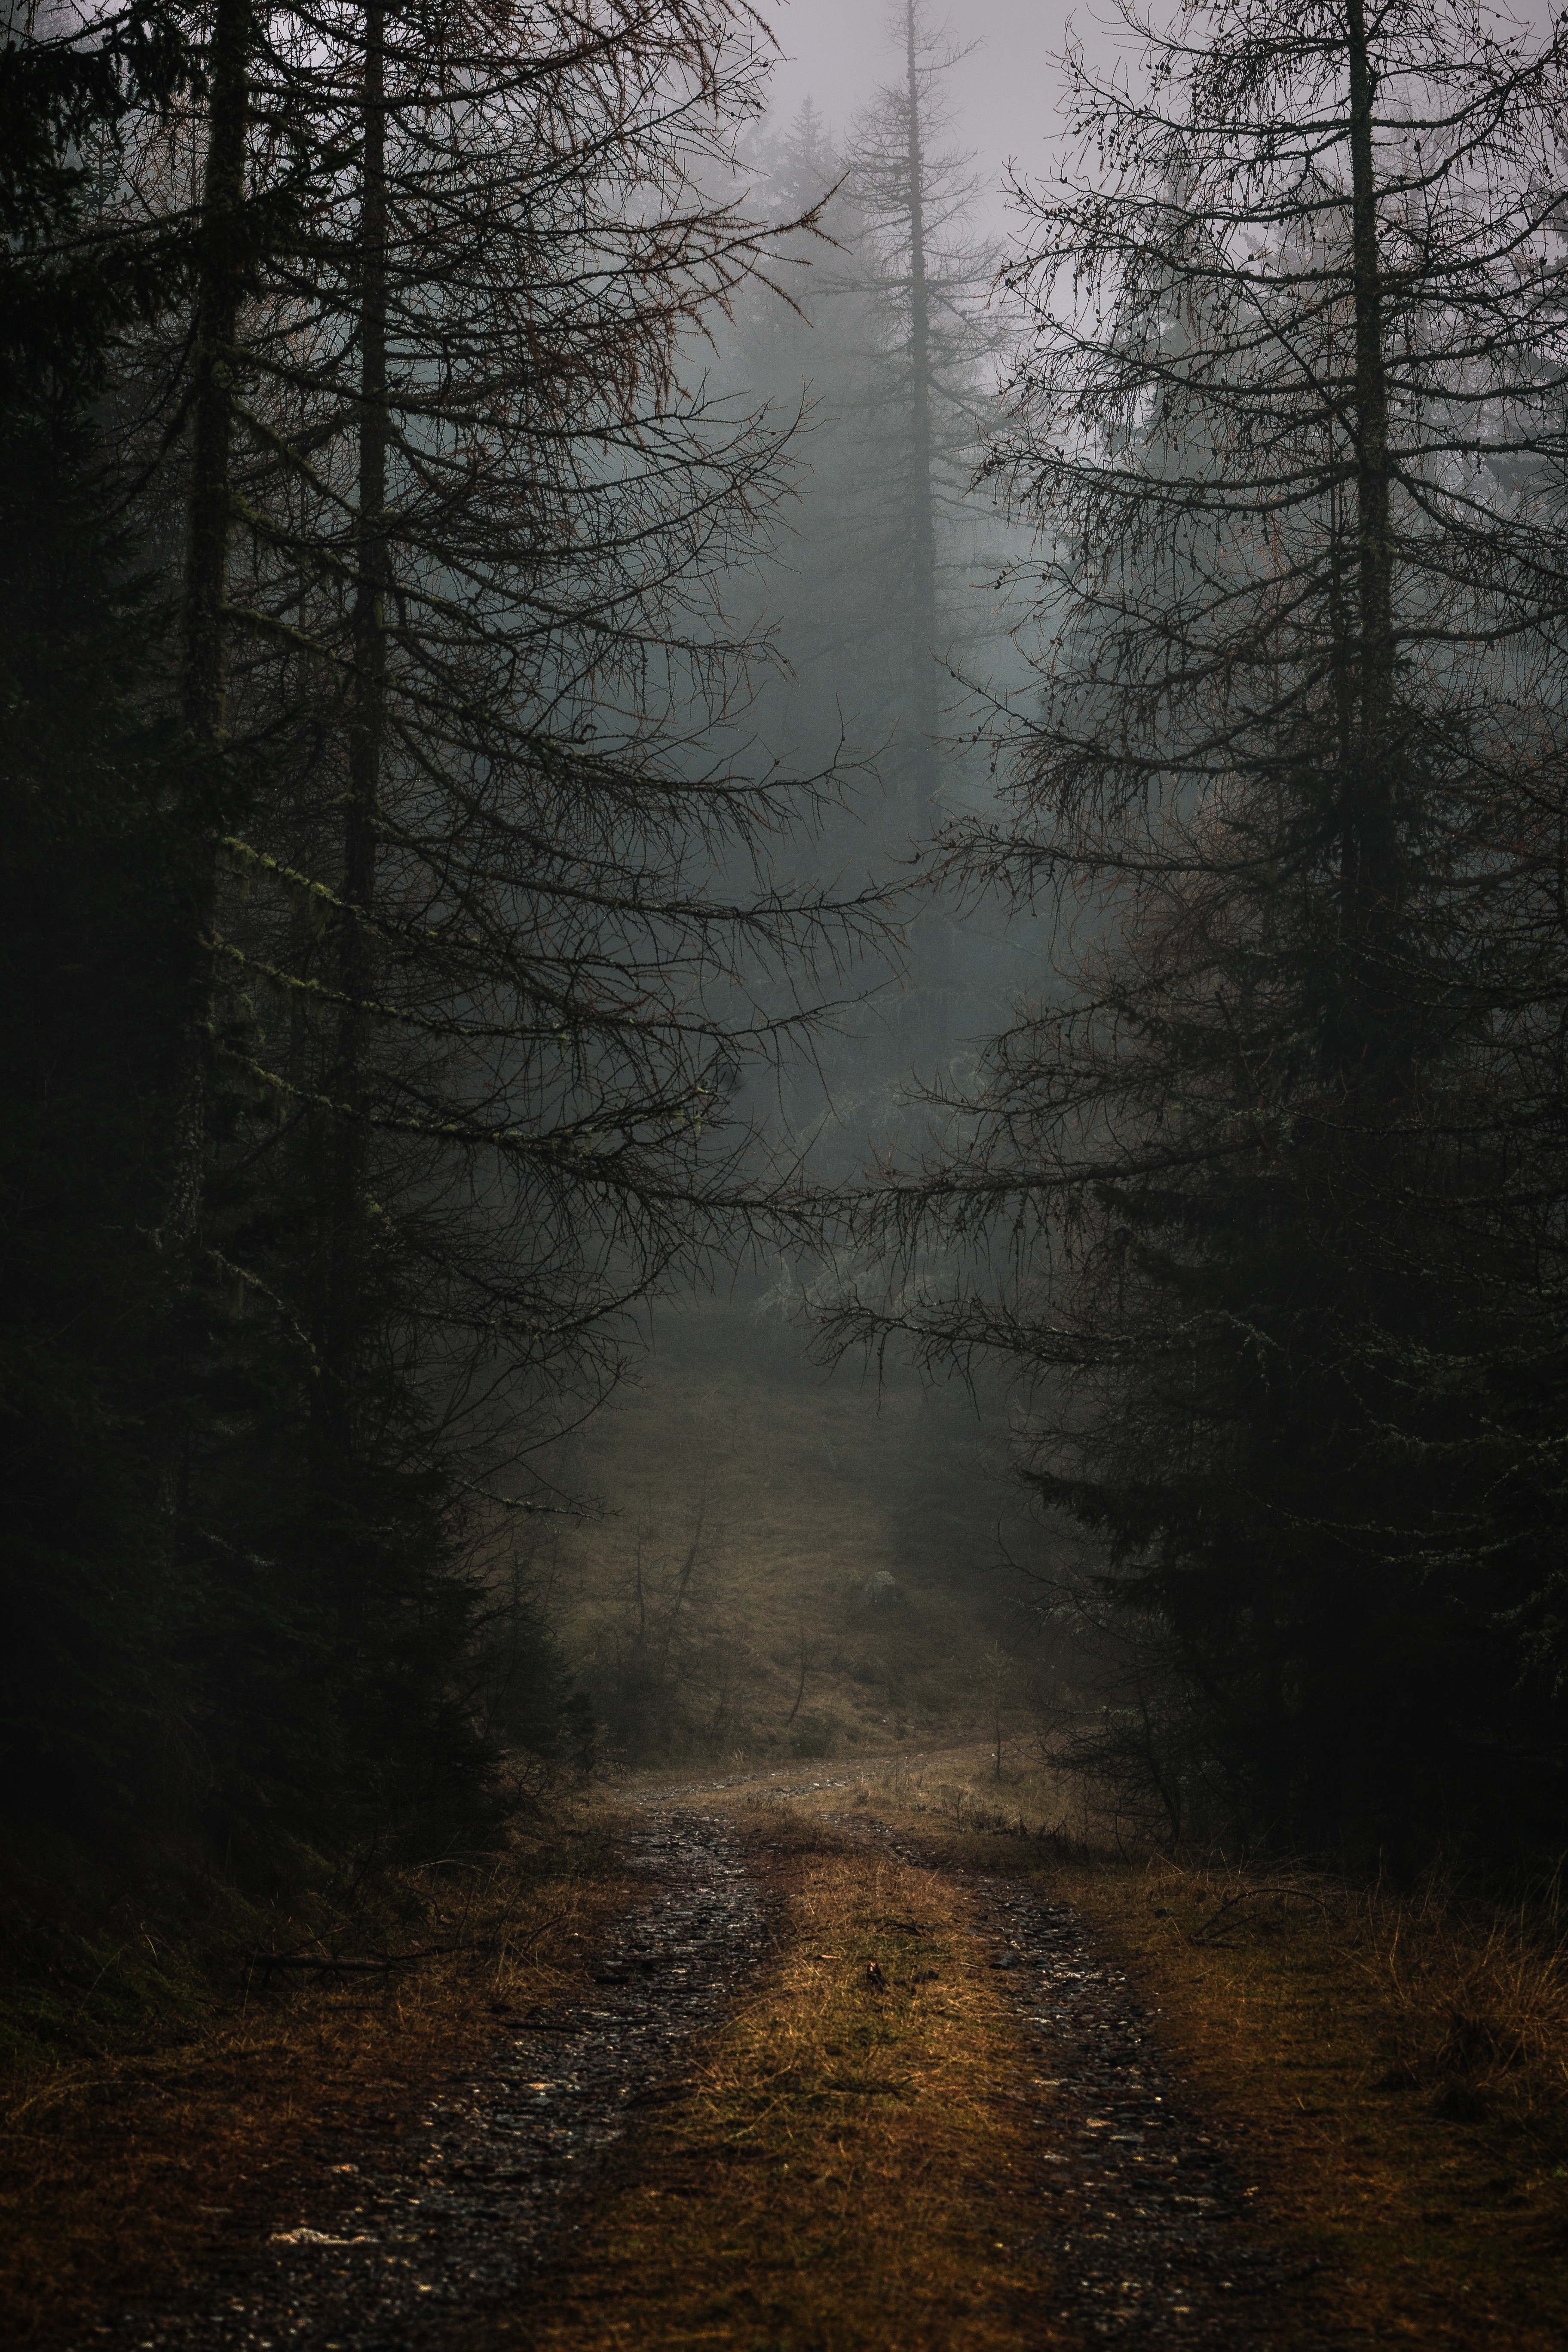 fog, autumn, nature, gloomy, trees, forest, branches, path